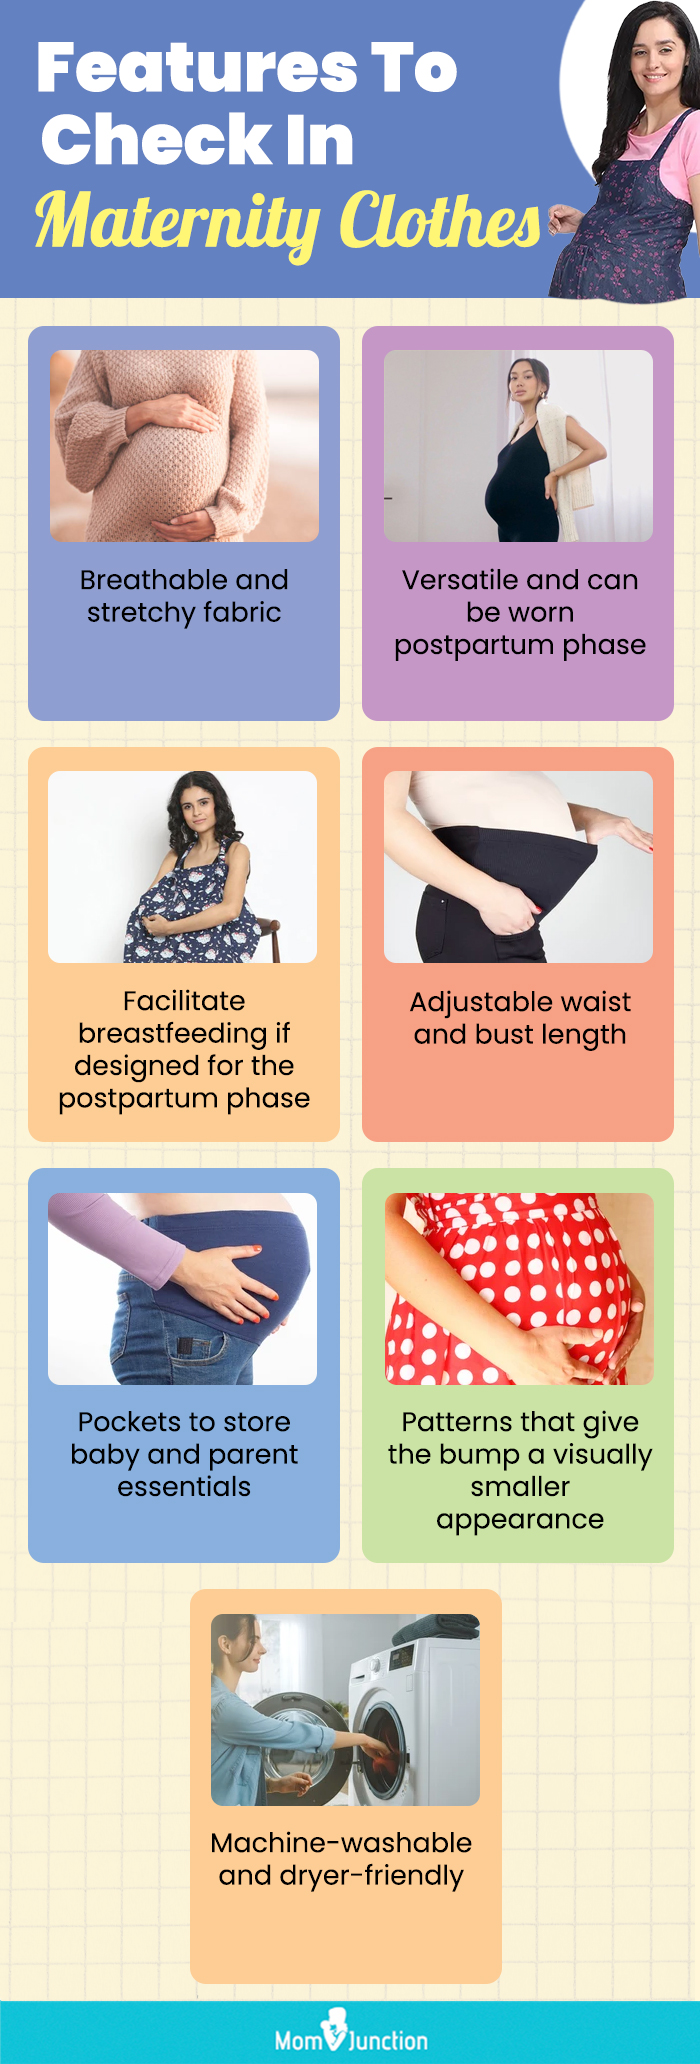 Features To Check In Maternity Clothes (infographic)